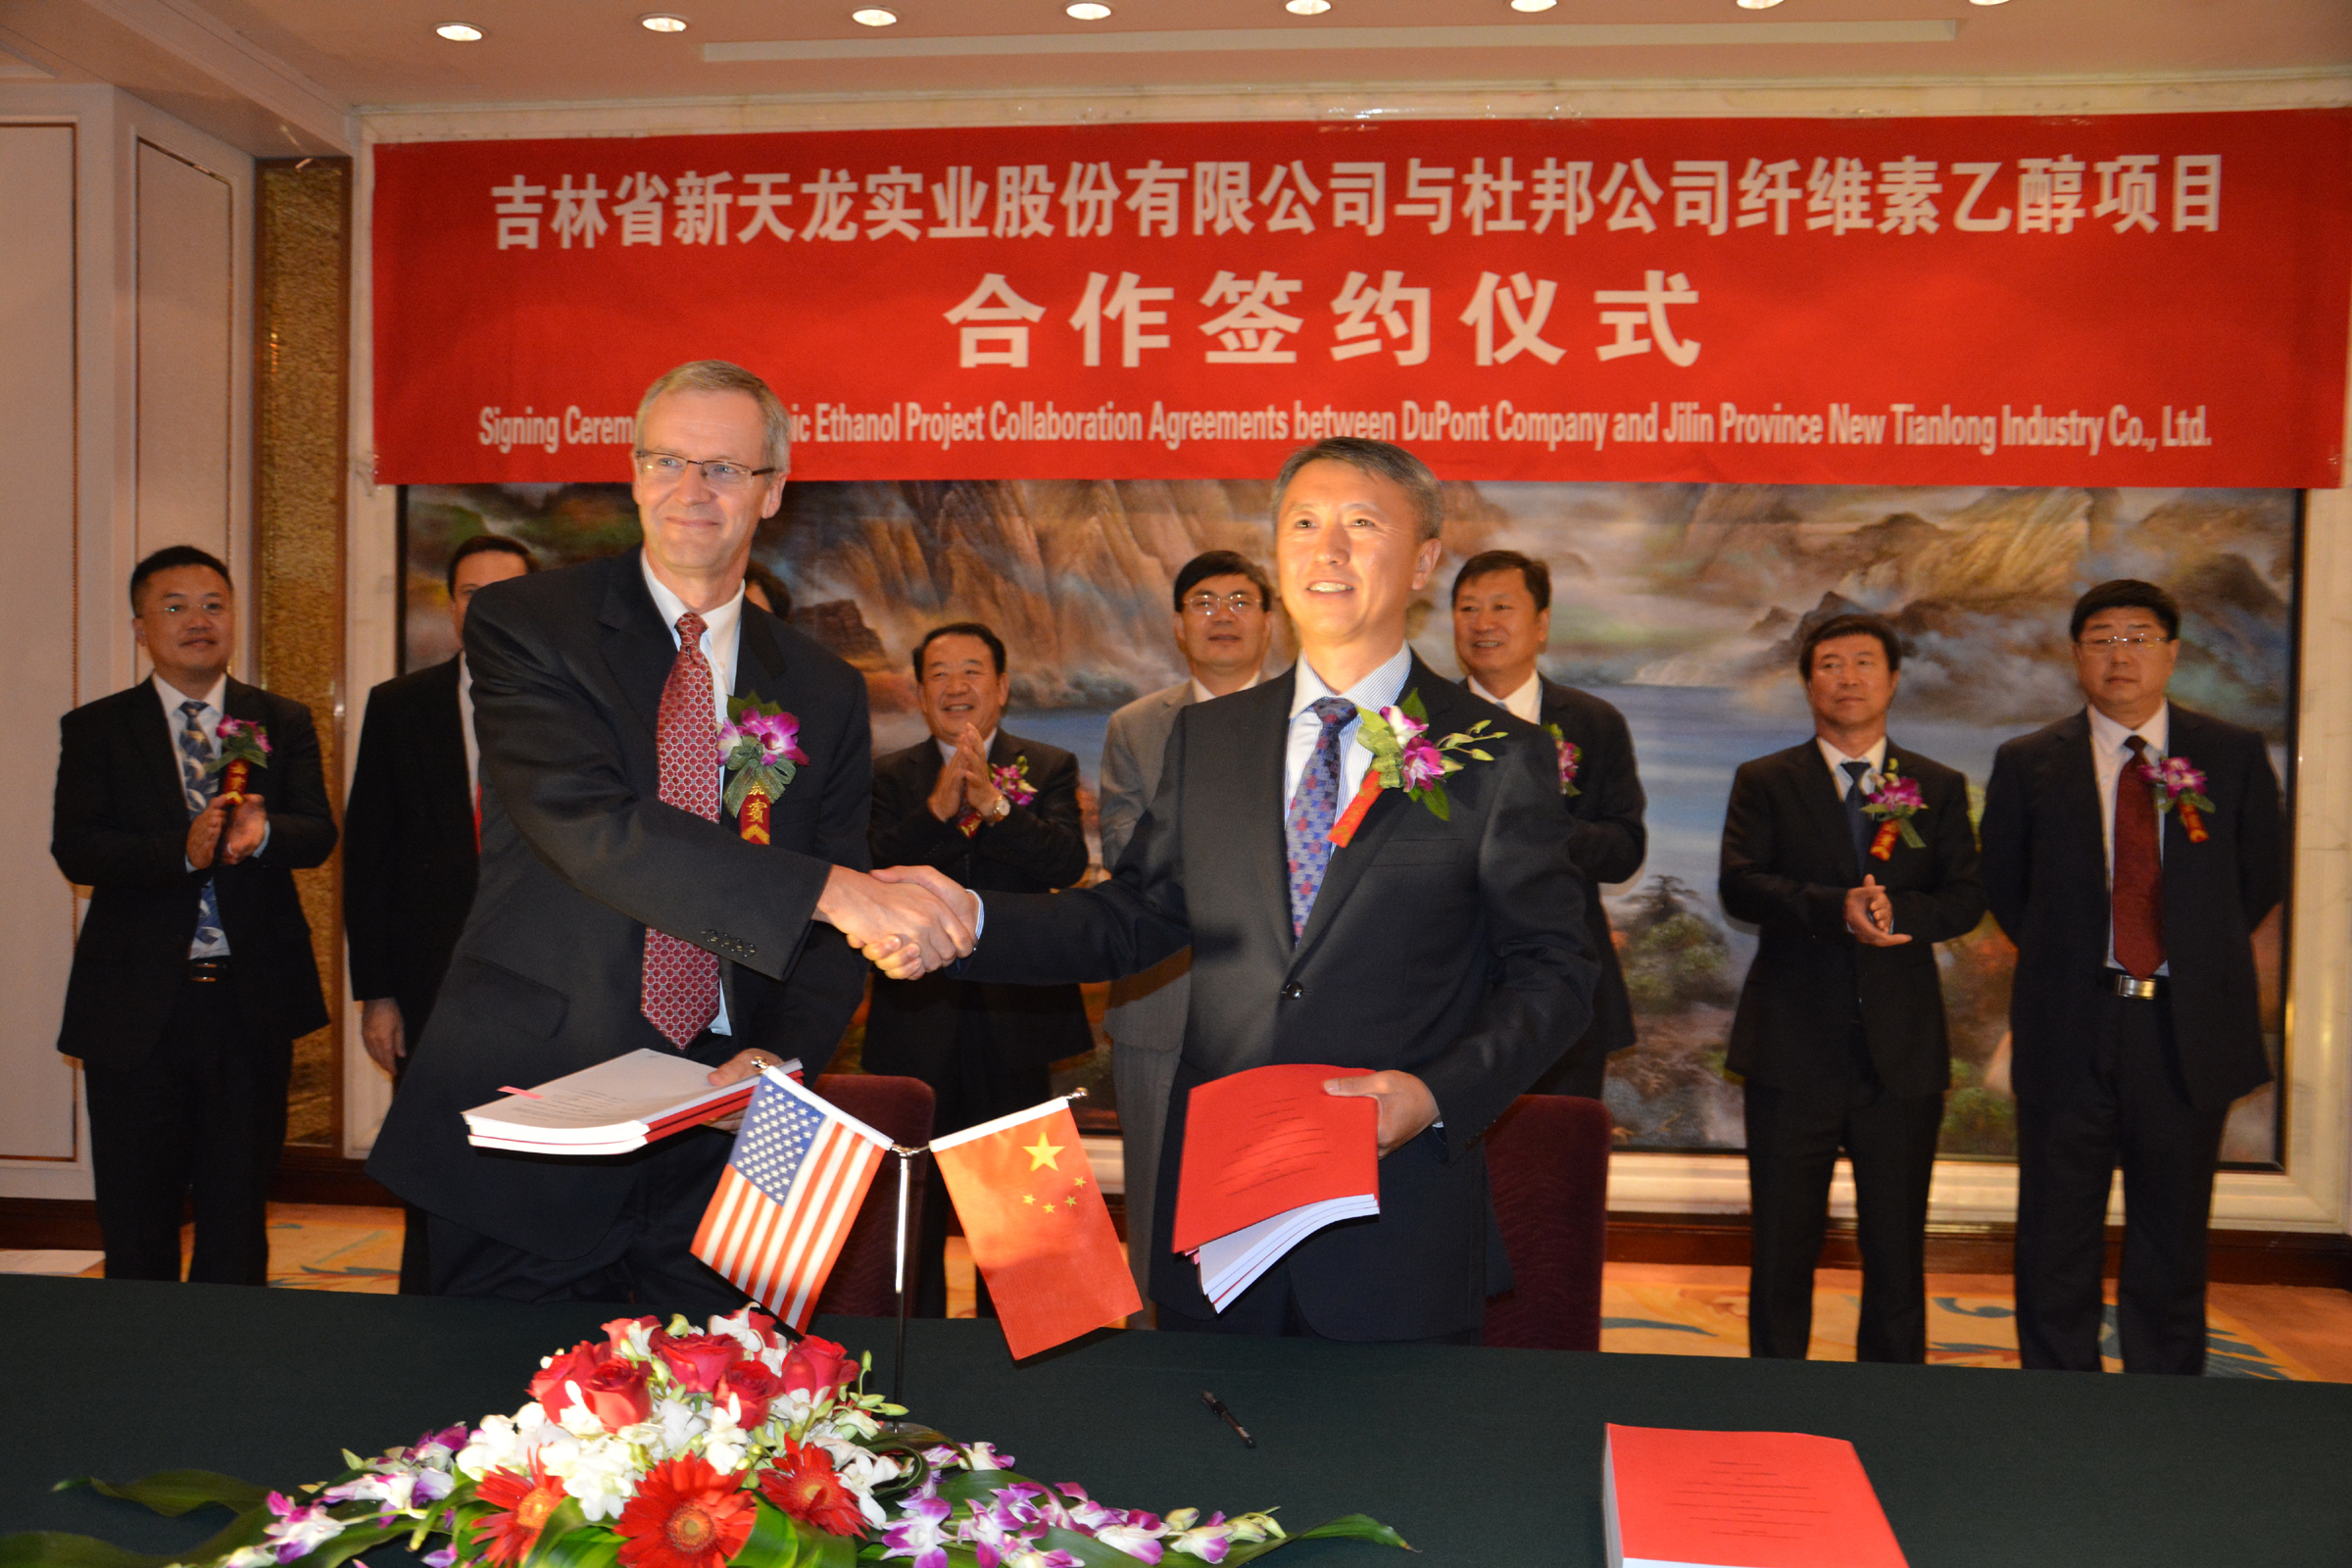 Signing Ceremony of Cellulosic Ethanol Project Collaboration Agreements between DuPont and Jilin Province New Tianlong Industry Co. Ltd. (NTL)